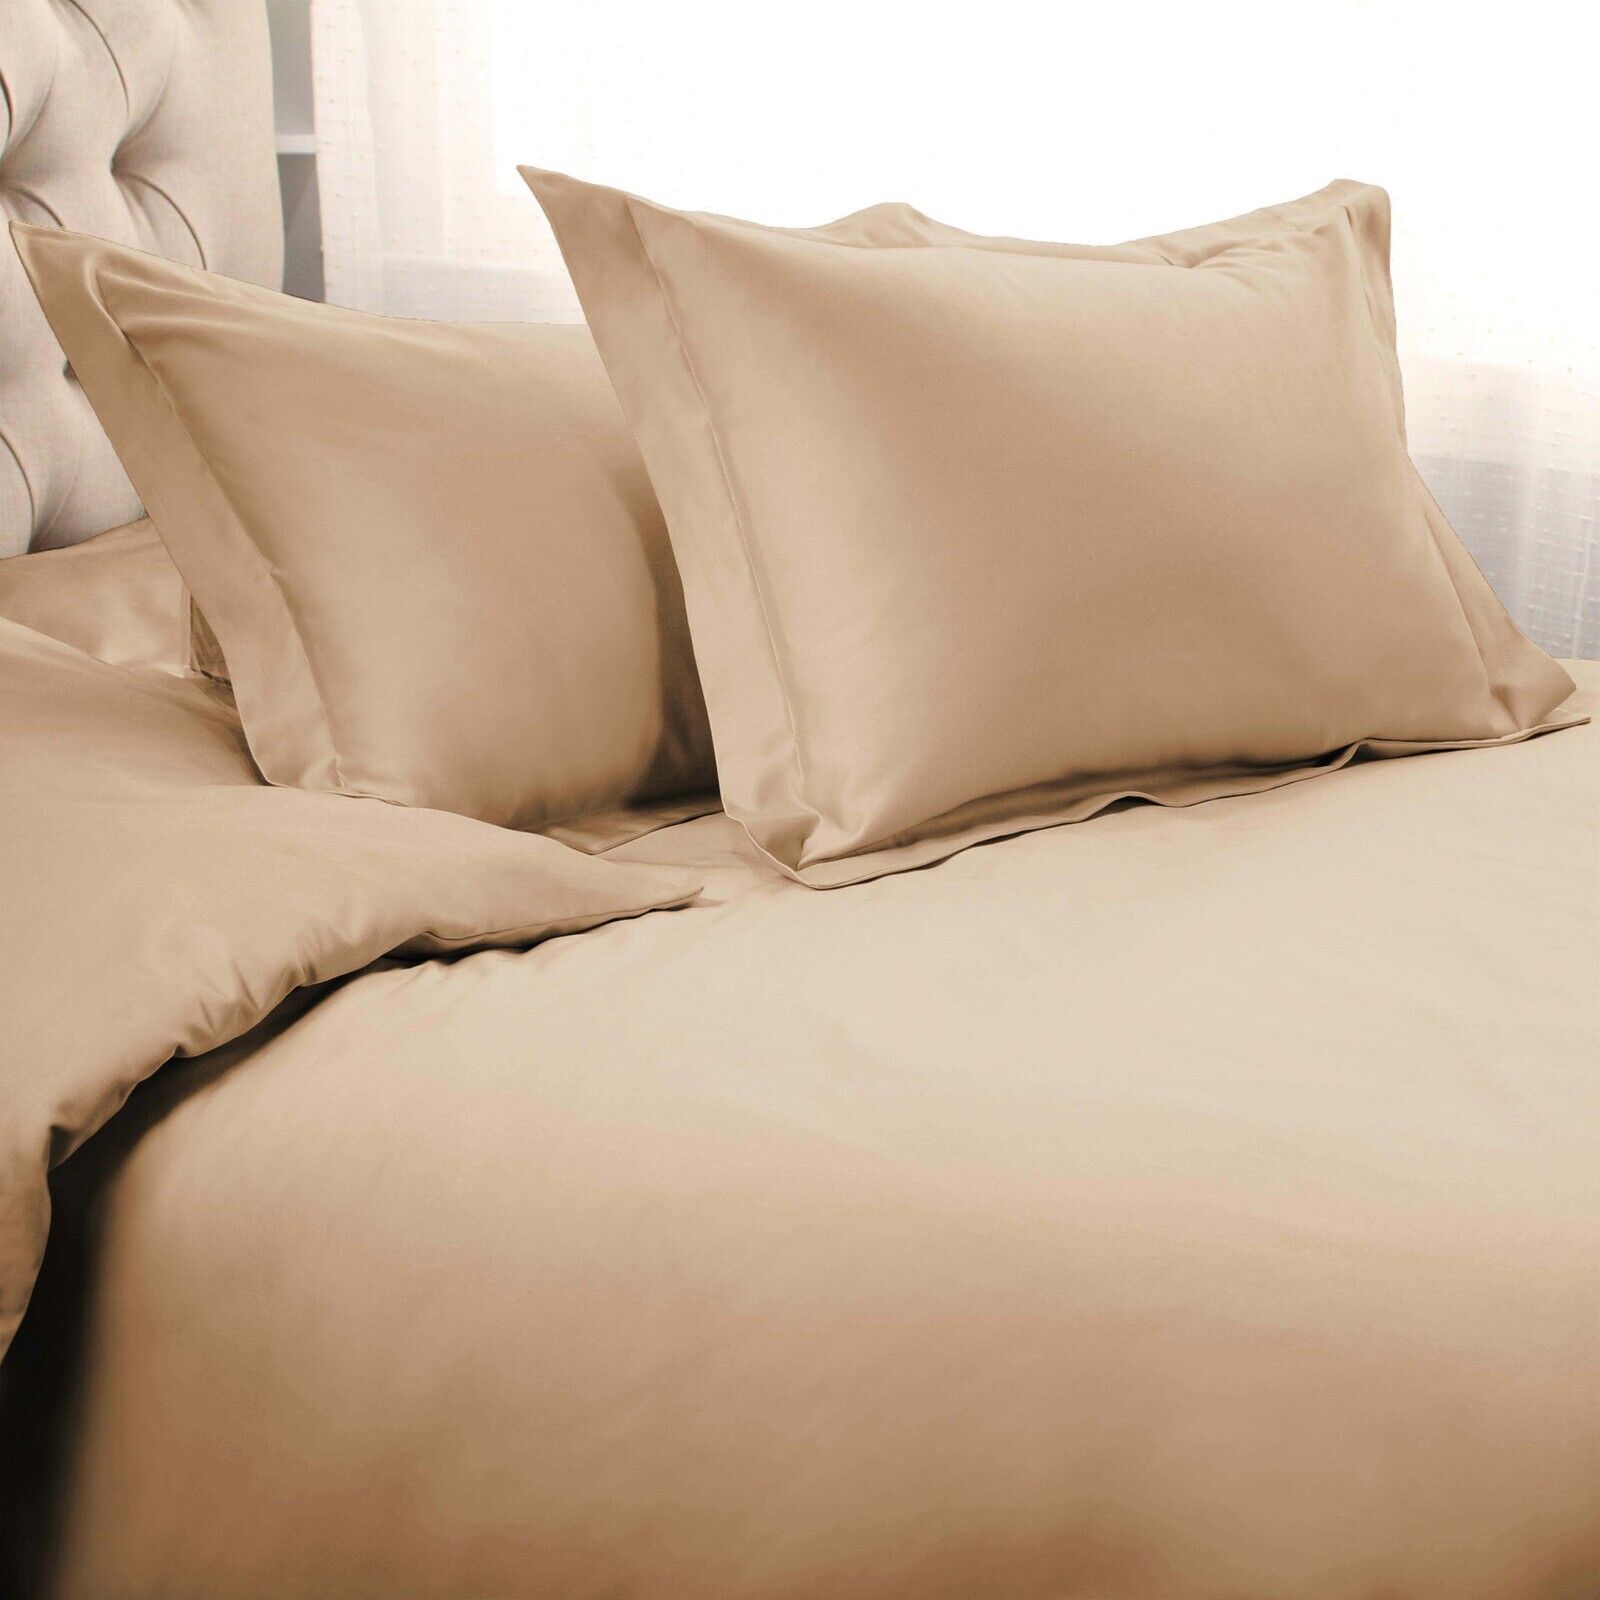 Superior Egyptian Cotton Solid All-Season Duvet Cover Set with Button Closure - Tan